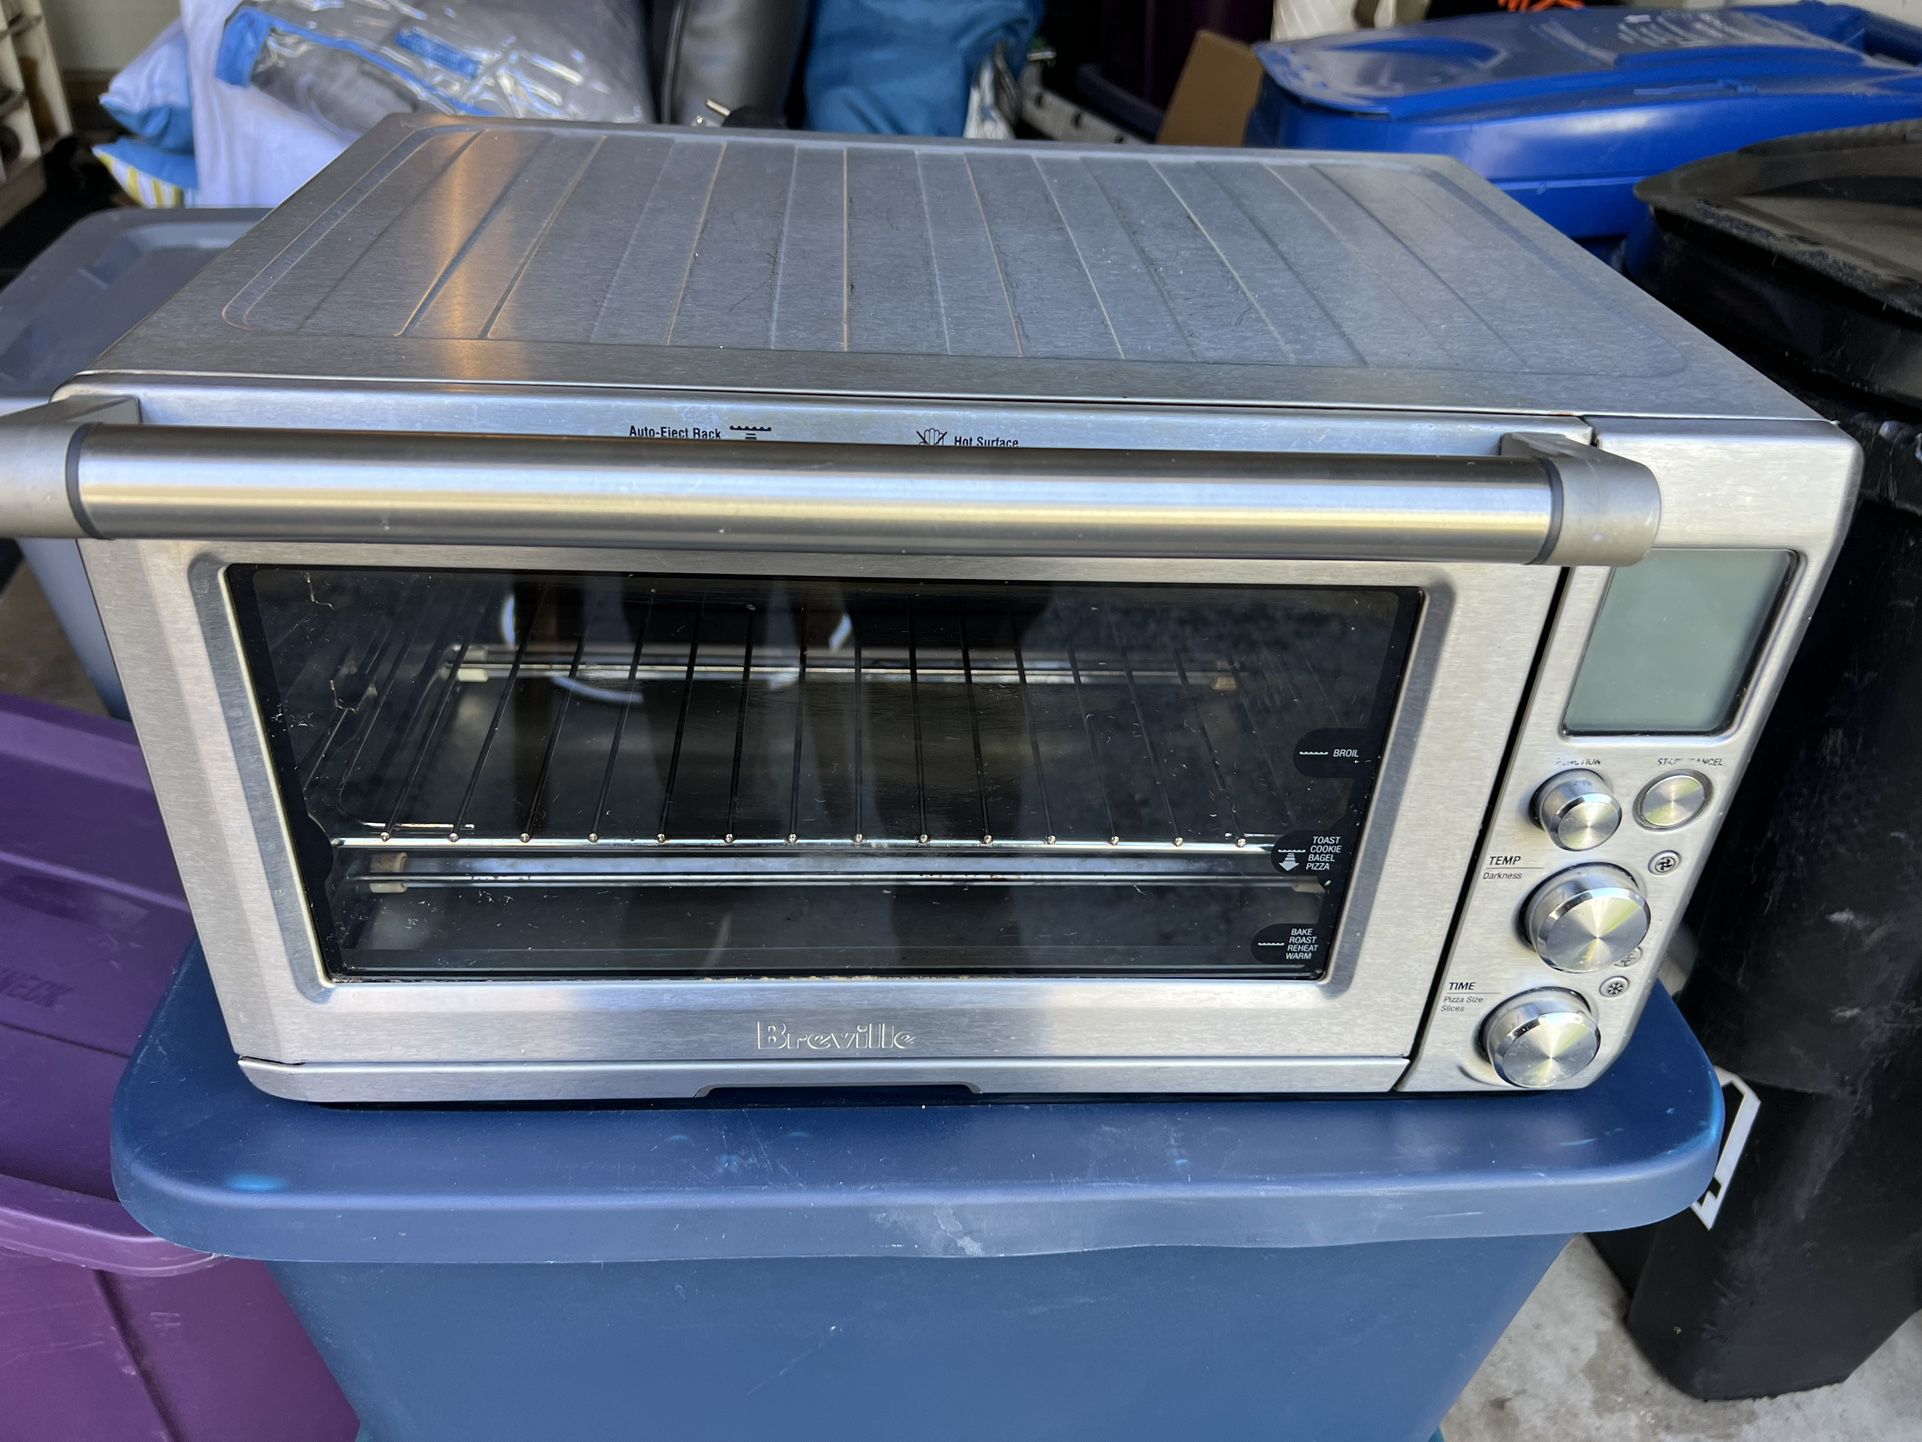 Breville Brand Convection and Toaster Oven